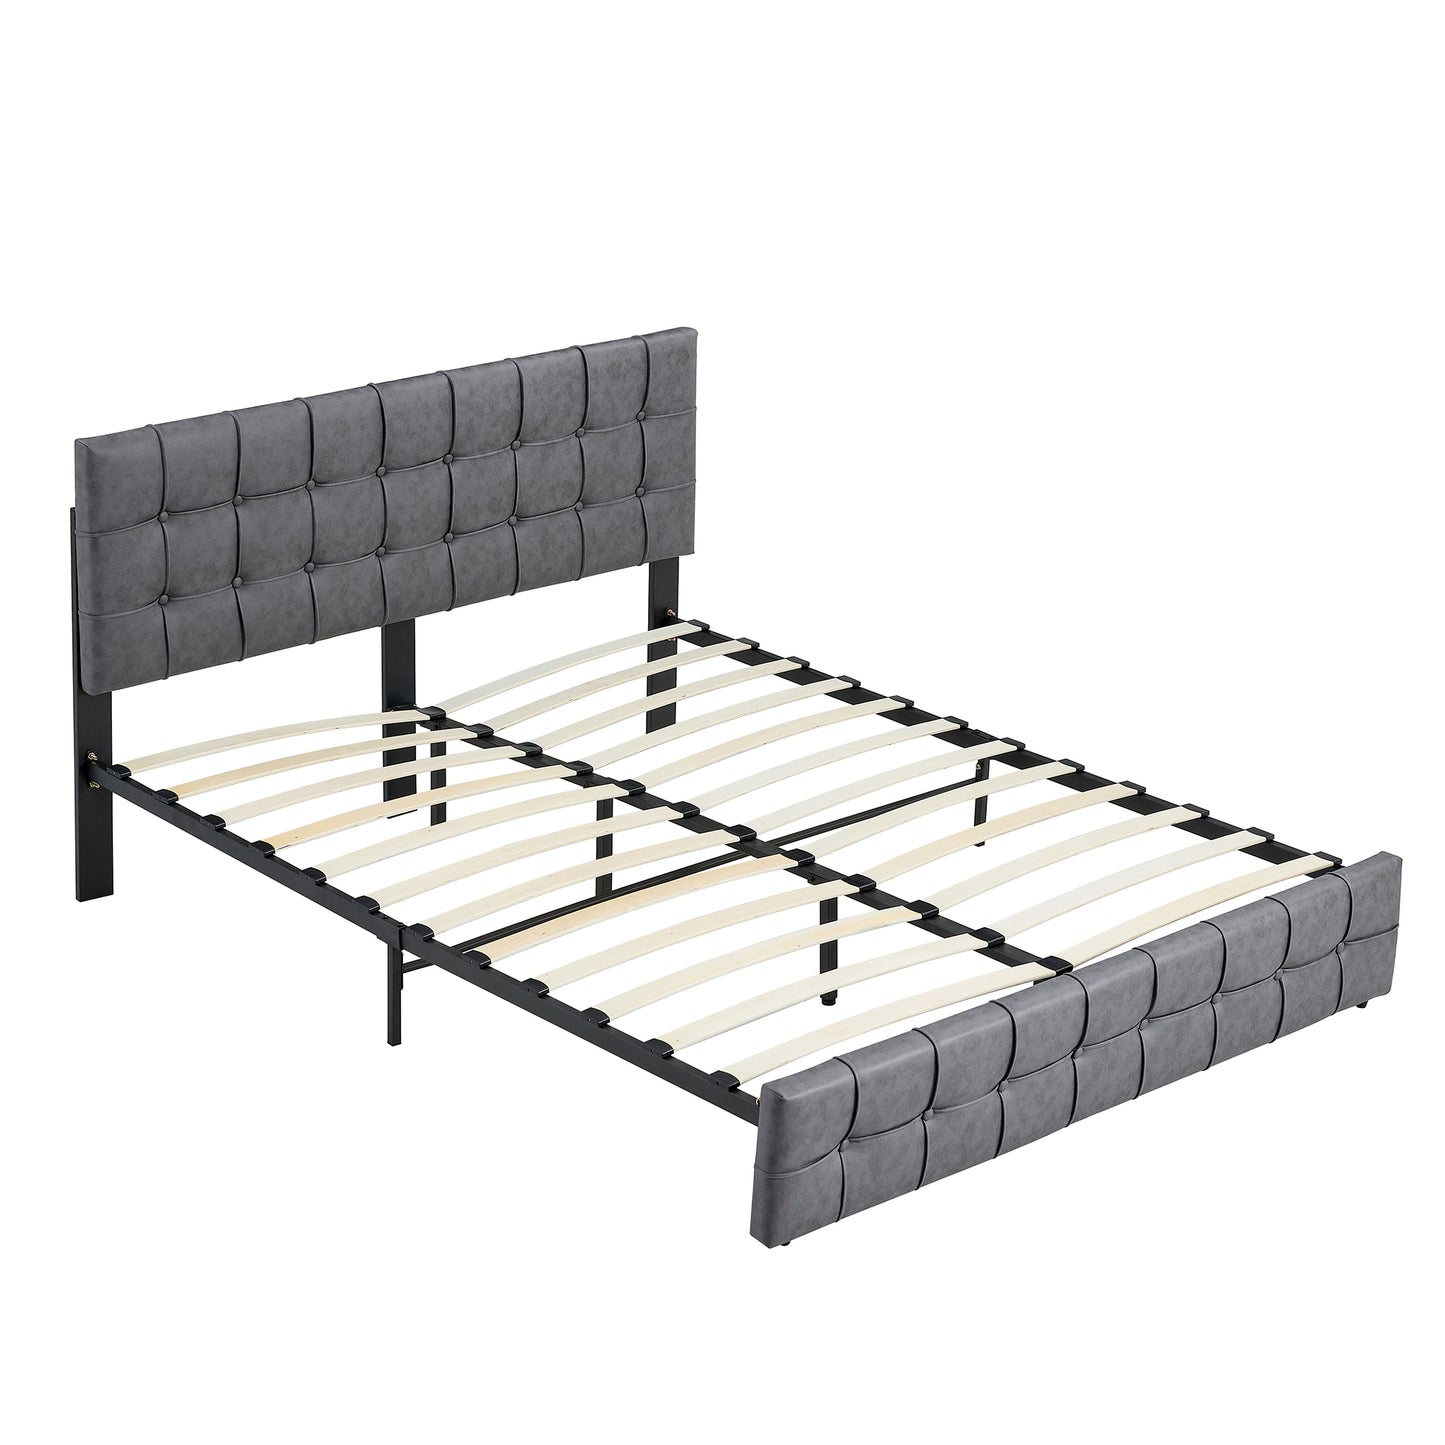 SYNGAR Upholstered Platform Bed Frame King Size with Button Tufted Headboard, Load-Bearing 650LBS, Heavy Duty Wood Mattress Foundation with Strong Slat Support for Kids Teens Adults, Gray